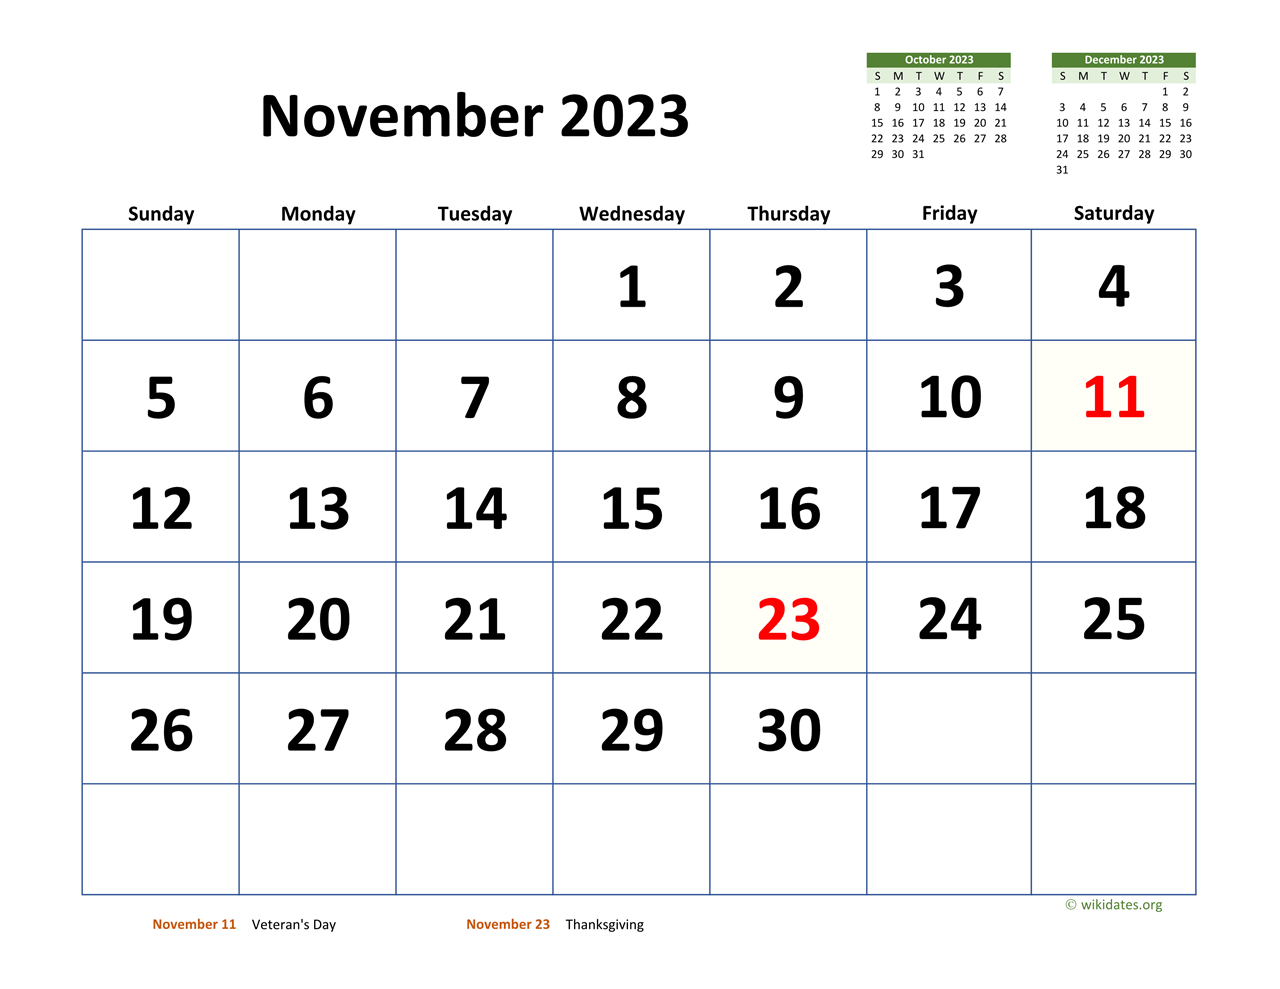 November 2023 Calendar with Extra-large Dates | WikiDates.org